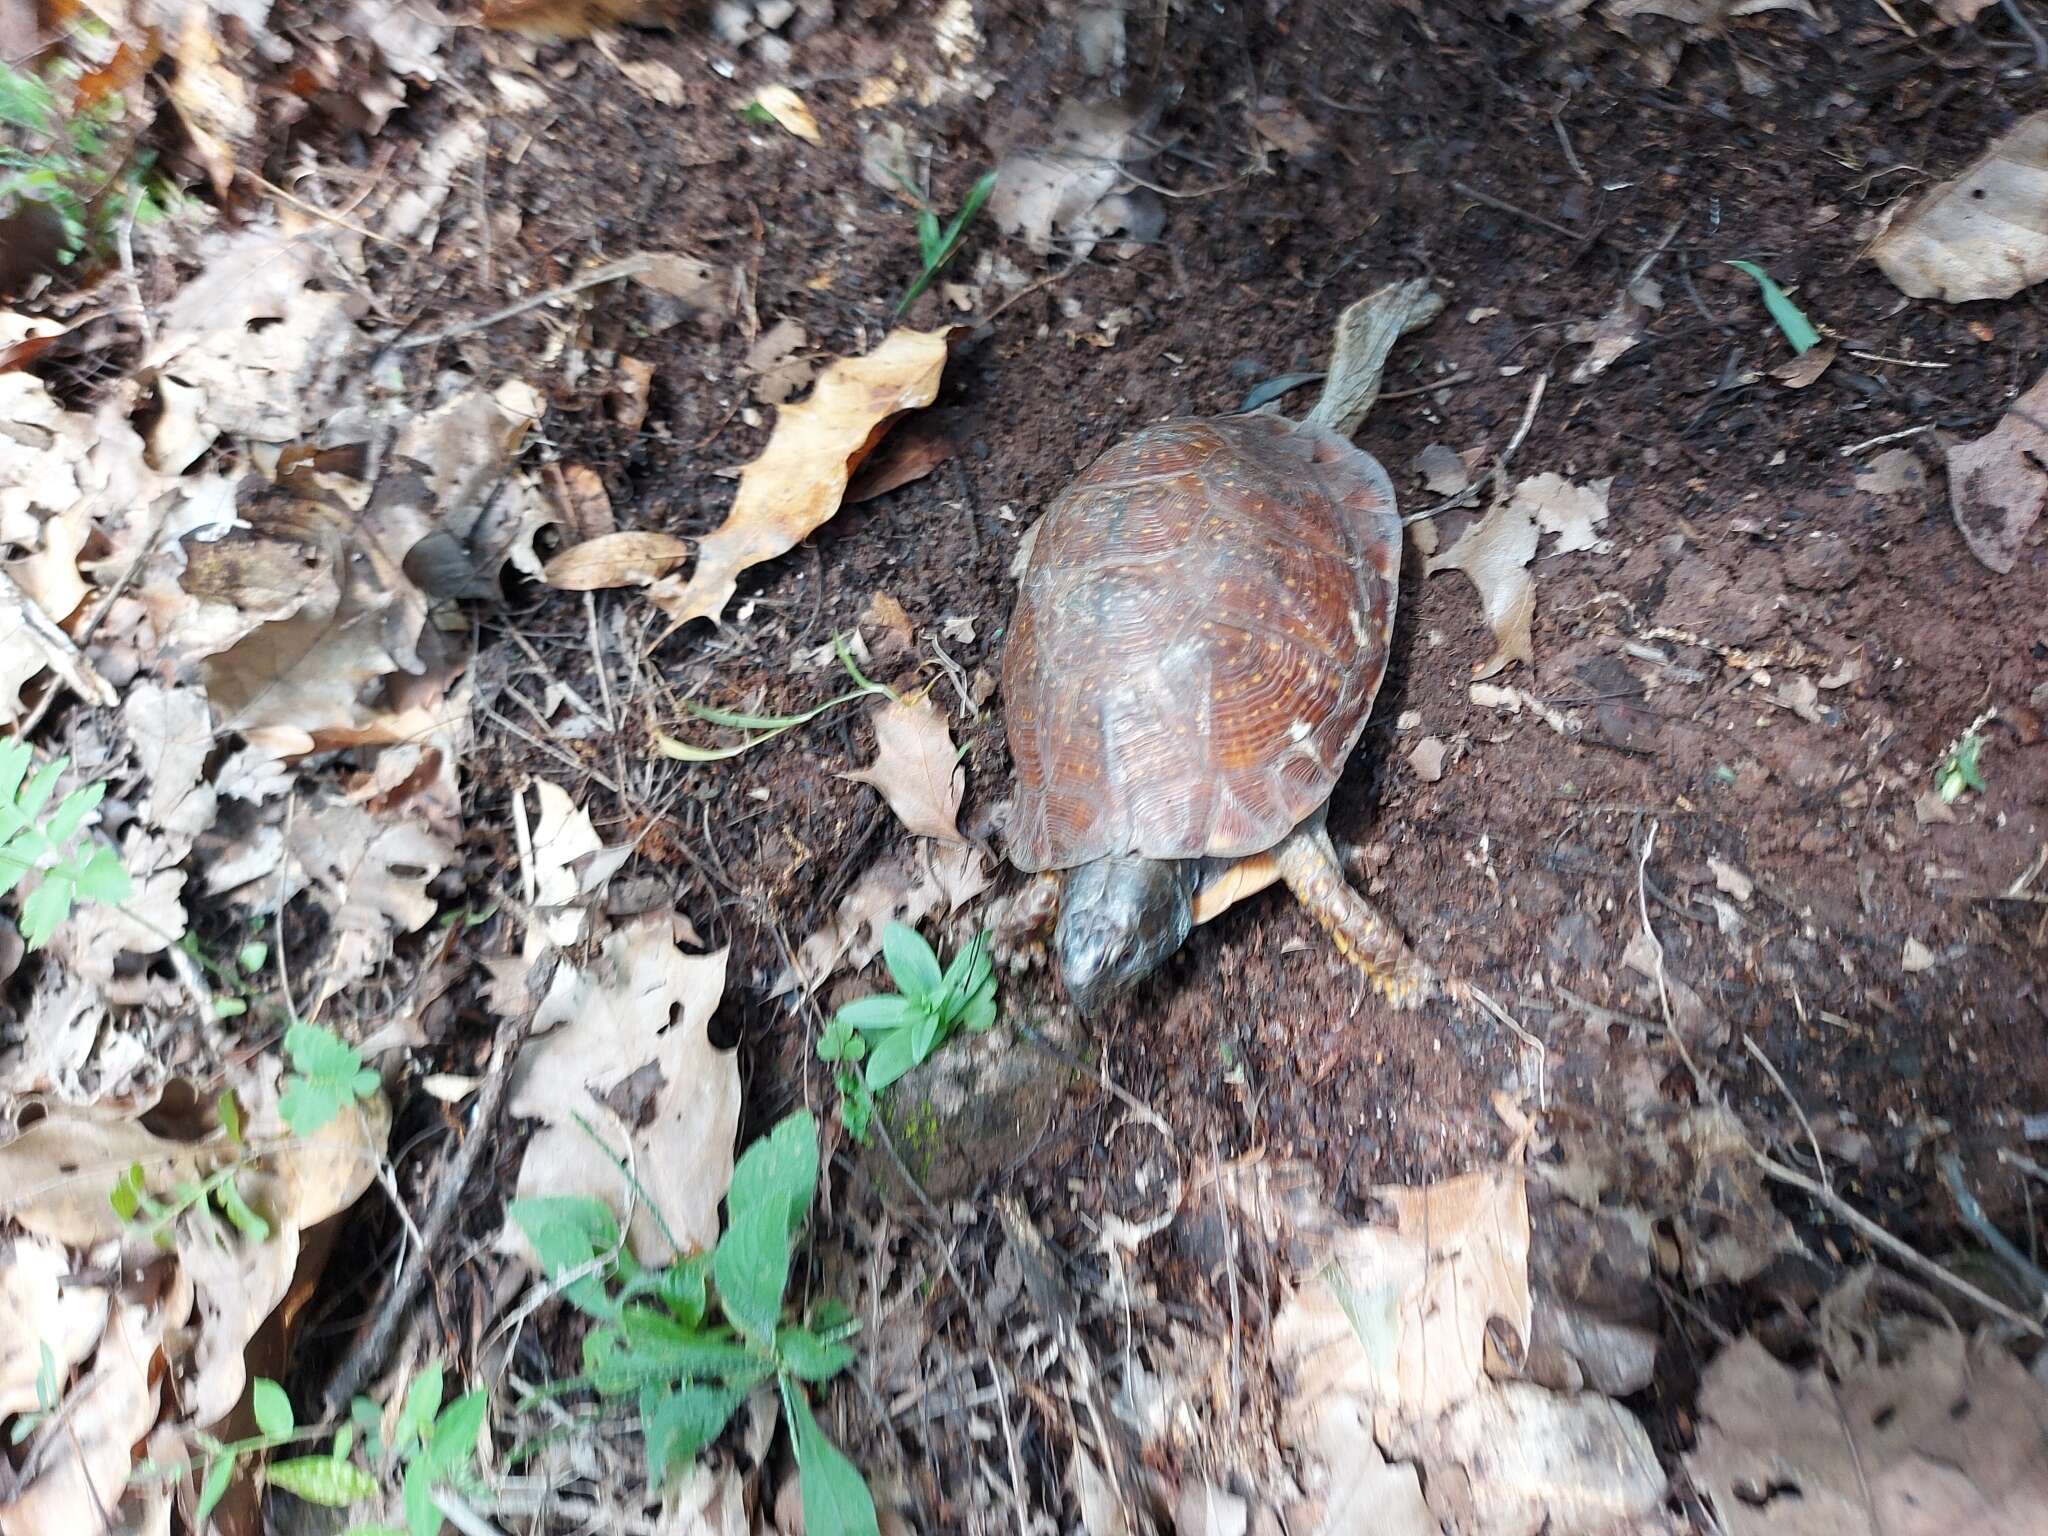 Image of Northern Spotted Box Turtle